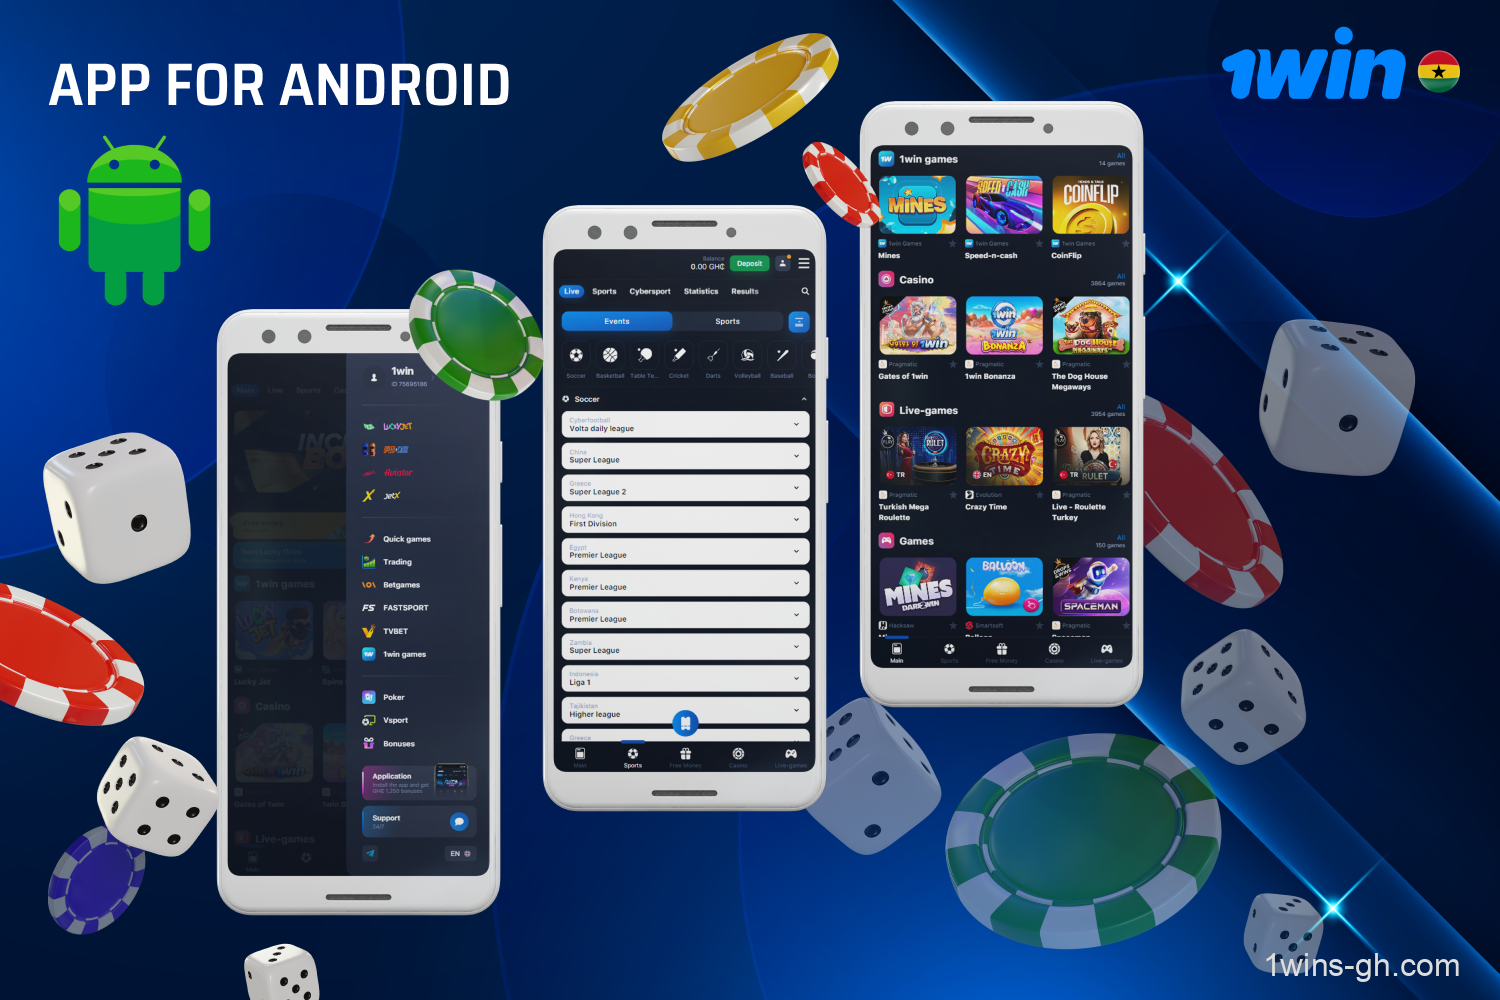 Ghanaian players can download the handy 1win mobile app to their Andoid device